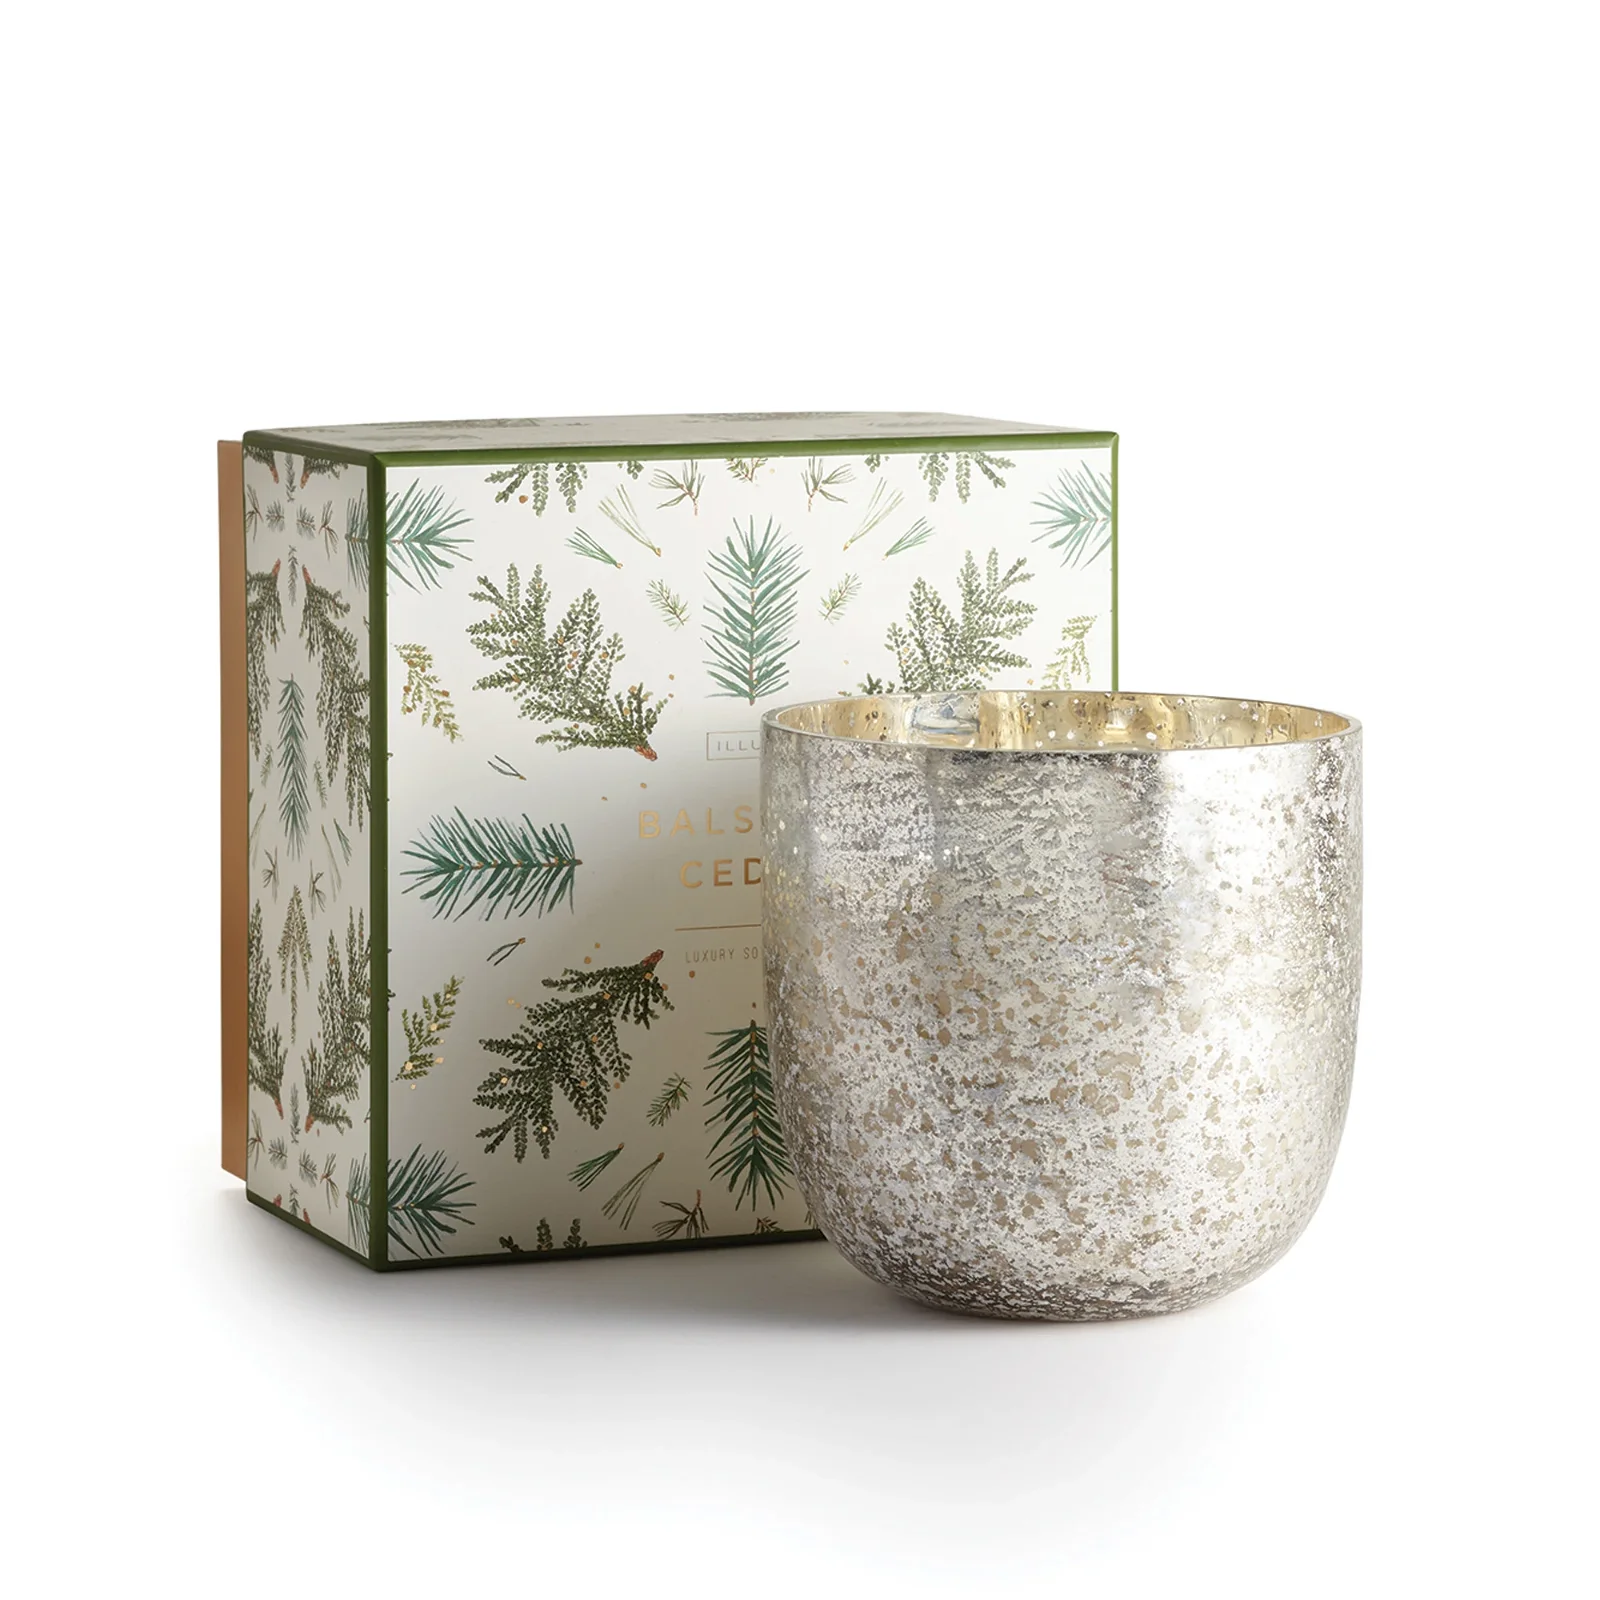 Image of Balsam & Cedar Luxe Sanded Mercury Glass Candle